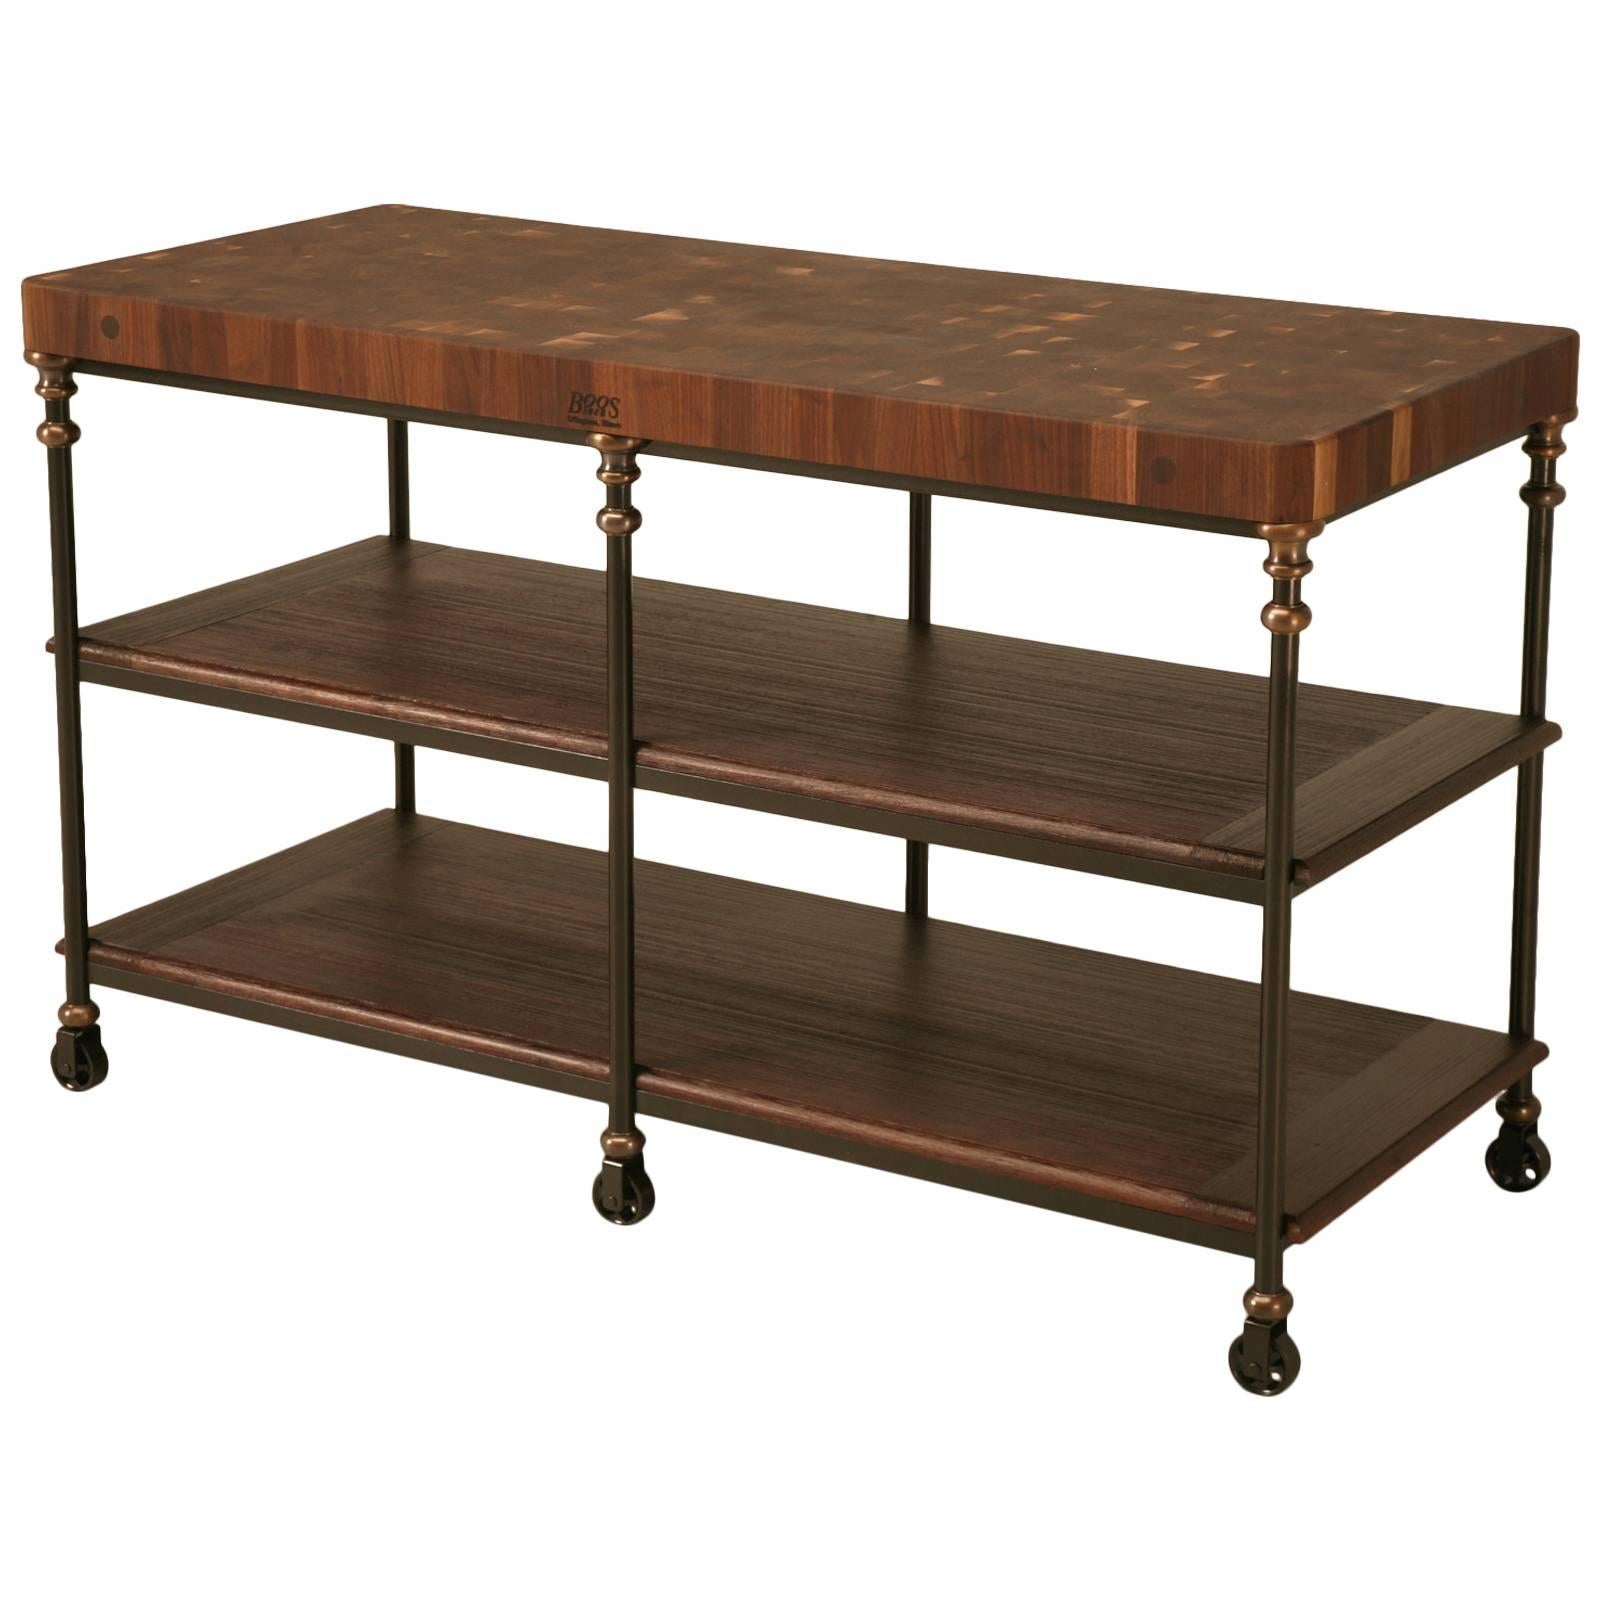 French Industrial Style Kitchen Island in Steel, Bronze and Walnut Butcher Block